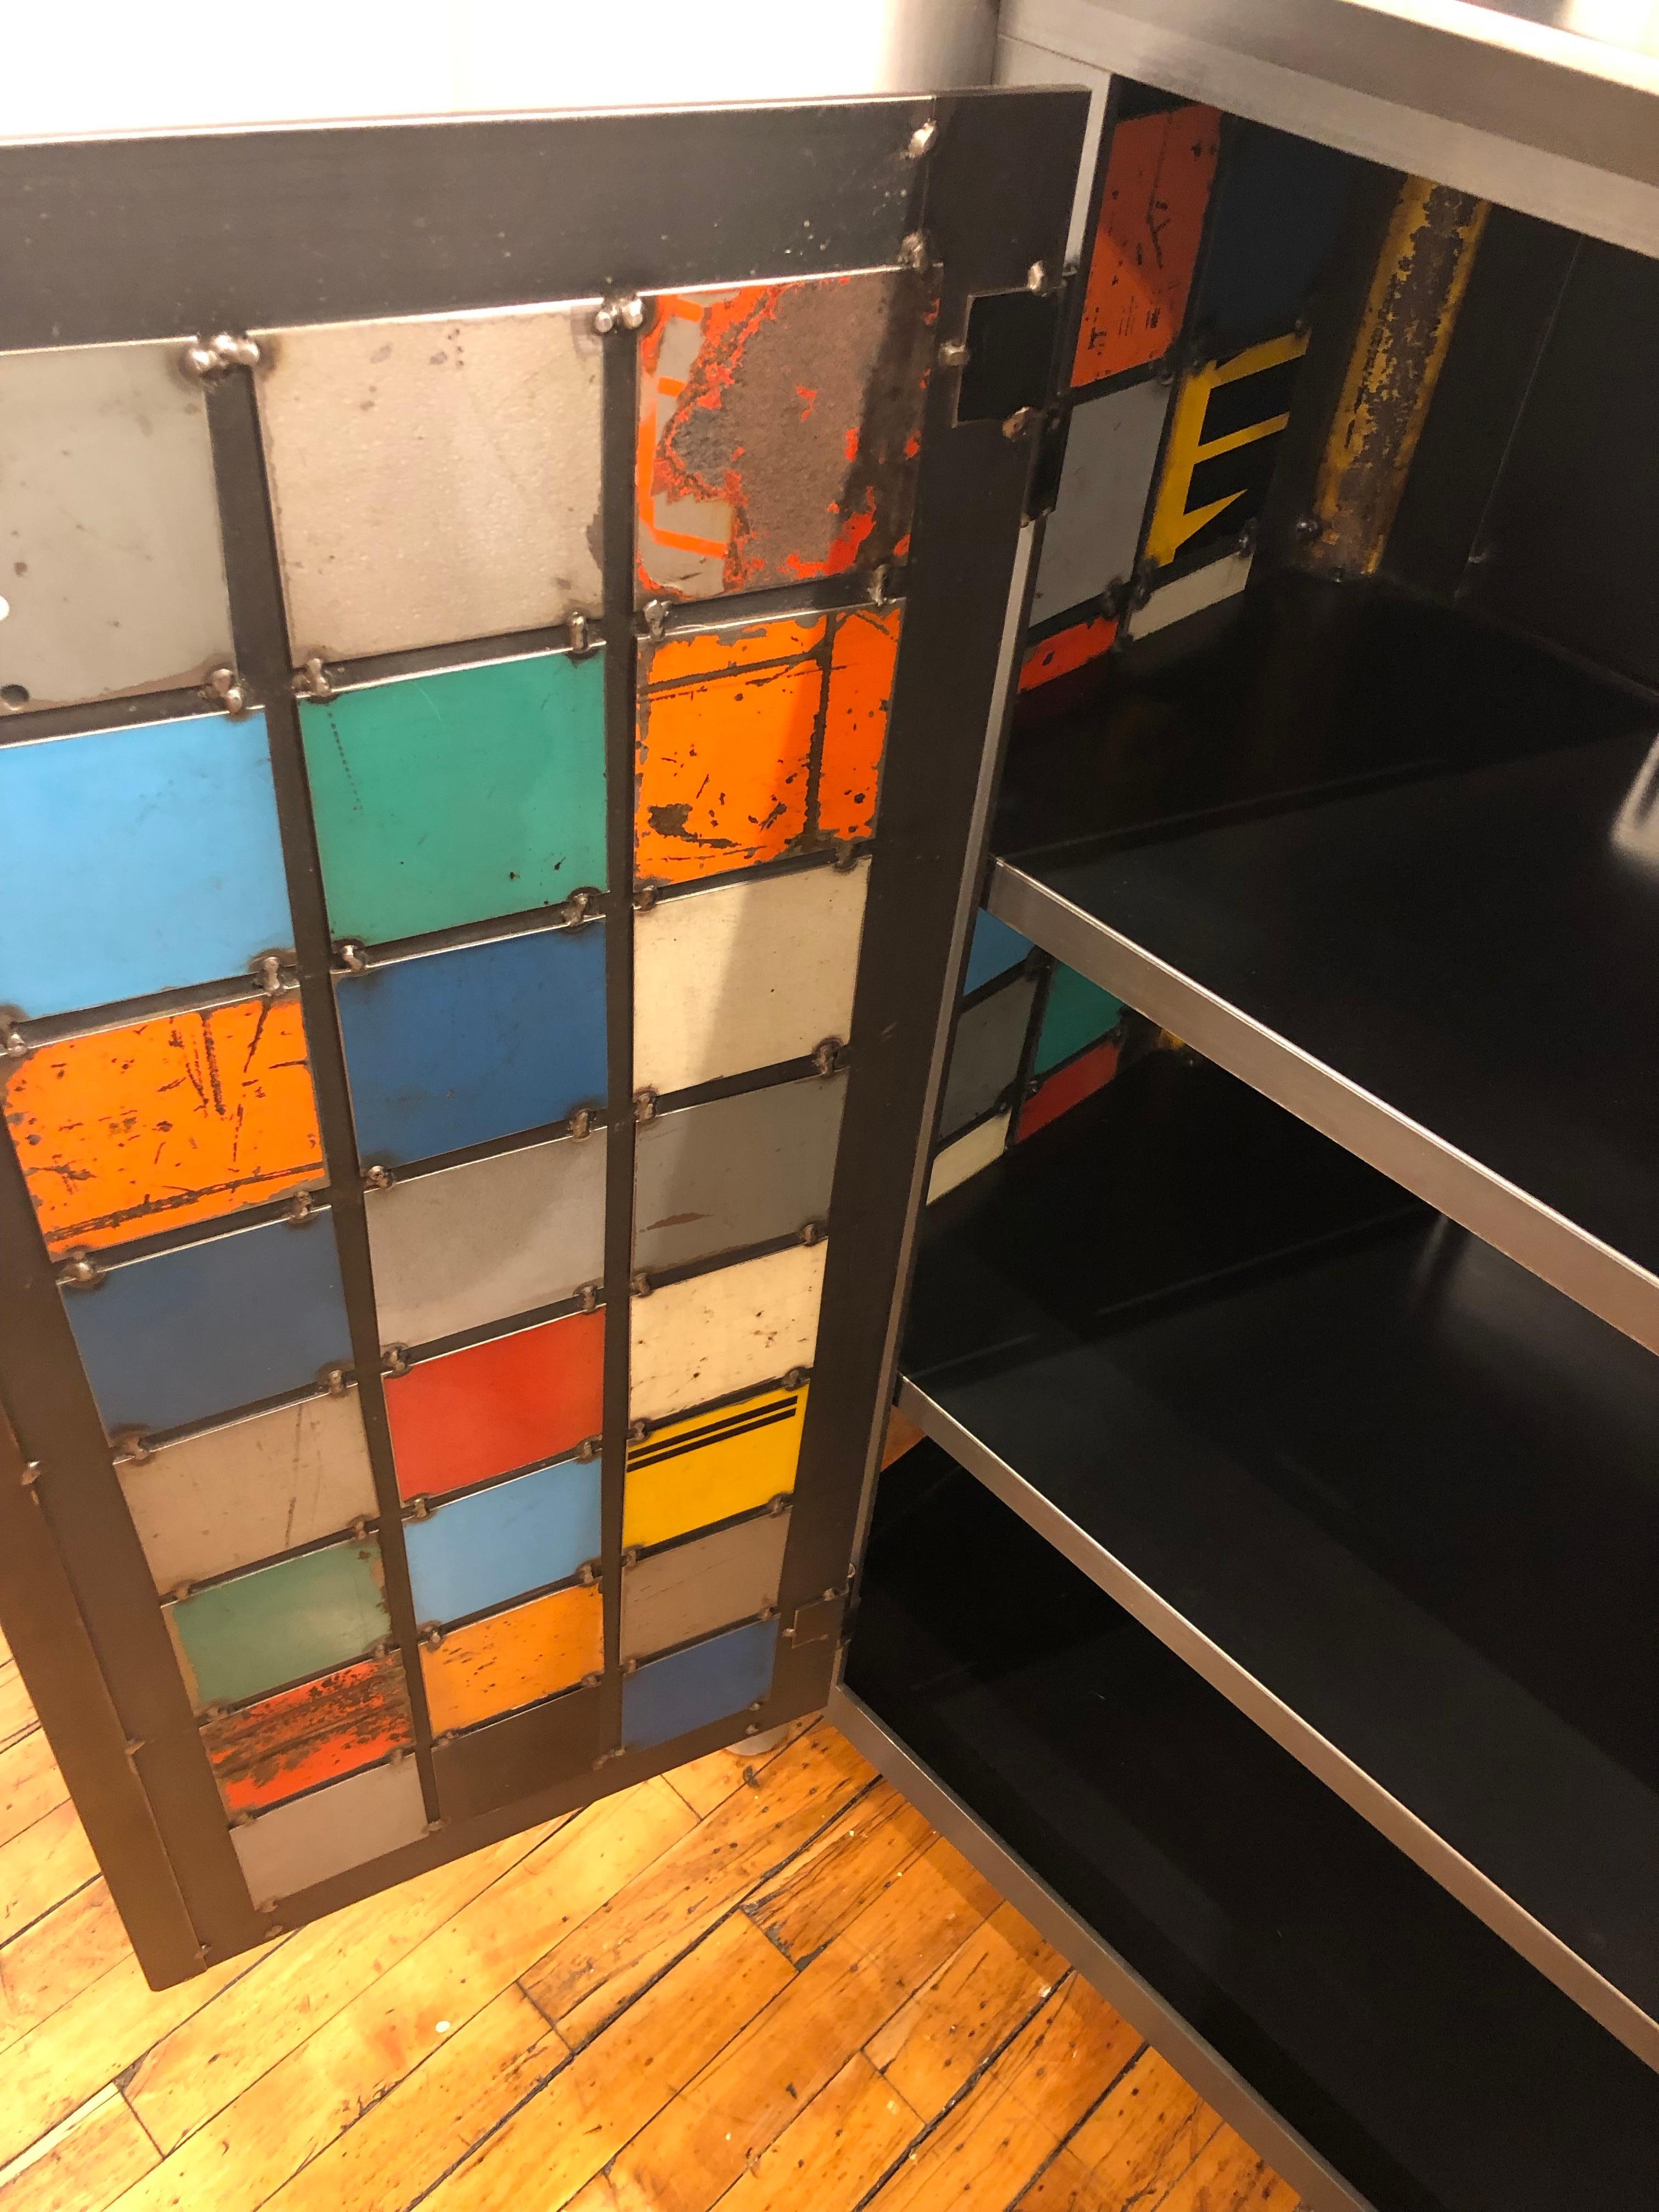 Jim Rose Two-Door Multicolor Block Quilt Cupboard, Steel Art Furniture In New Condition In Chicago, IL